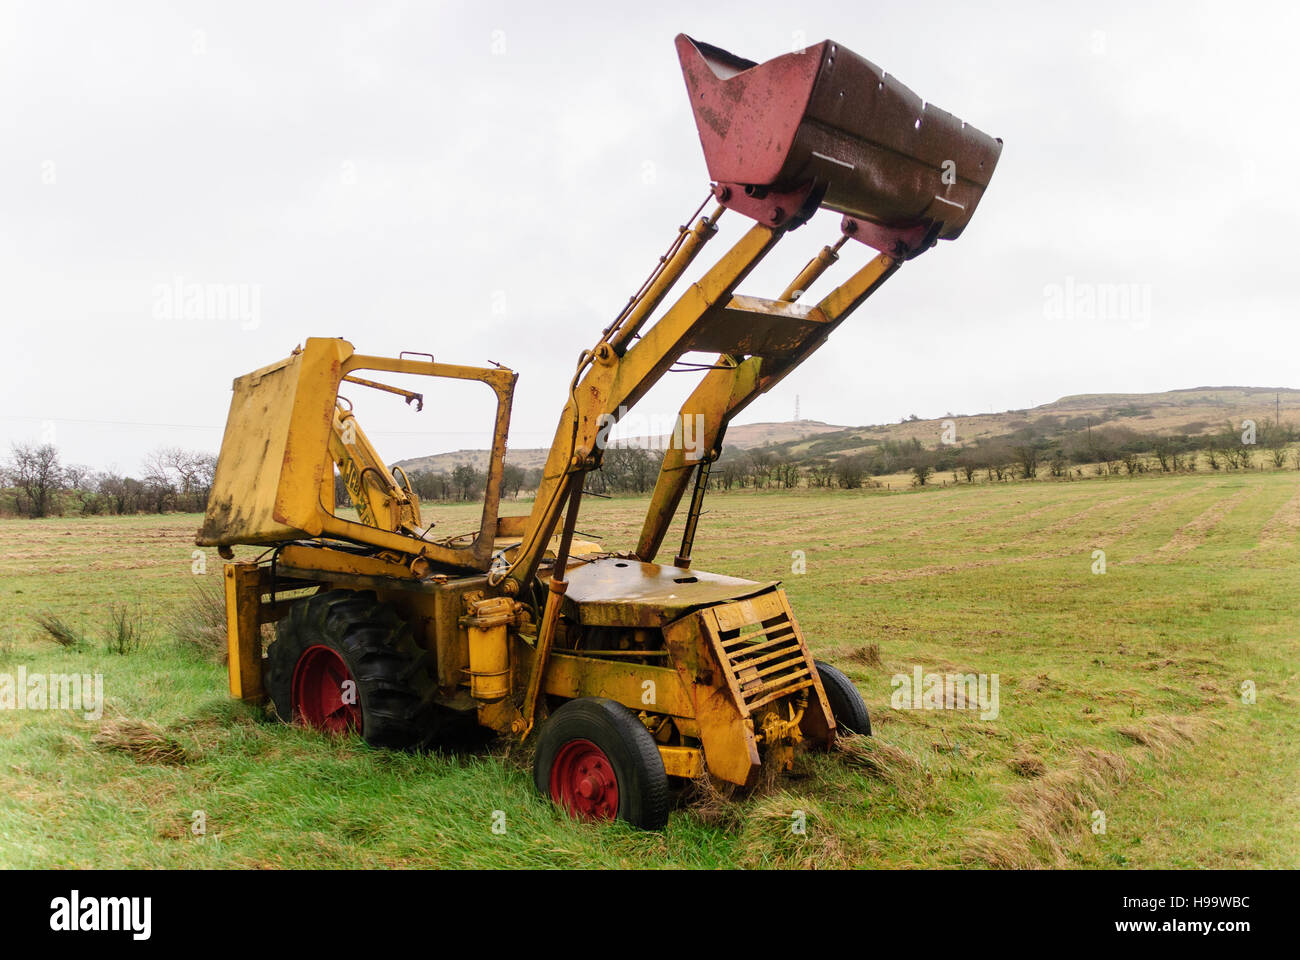 A yellow JCB digger rusts in a rural field. Stock Photo